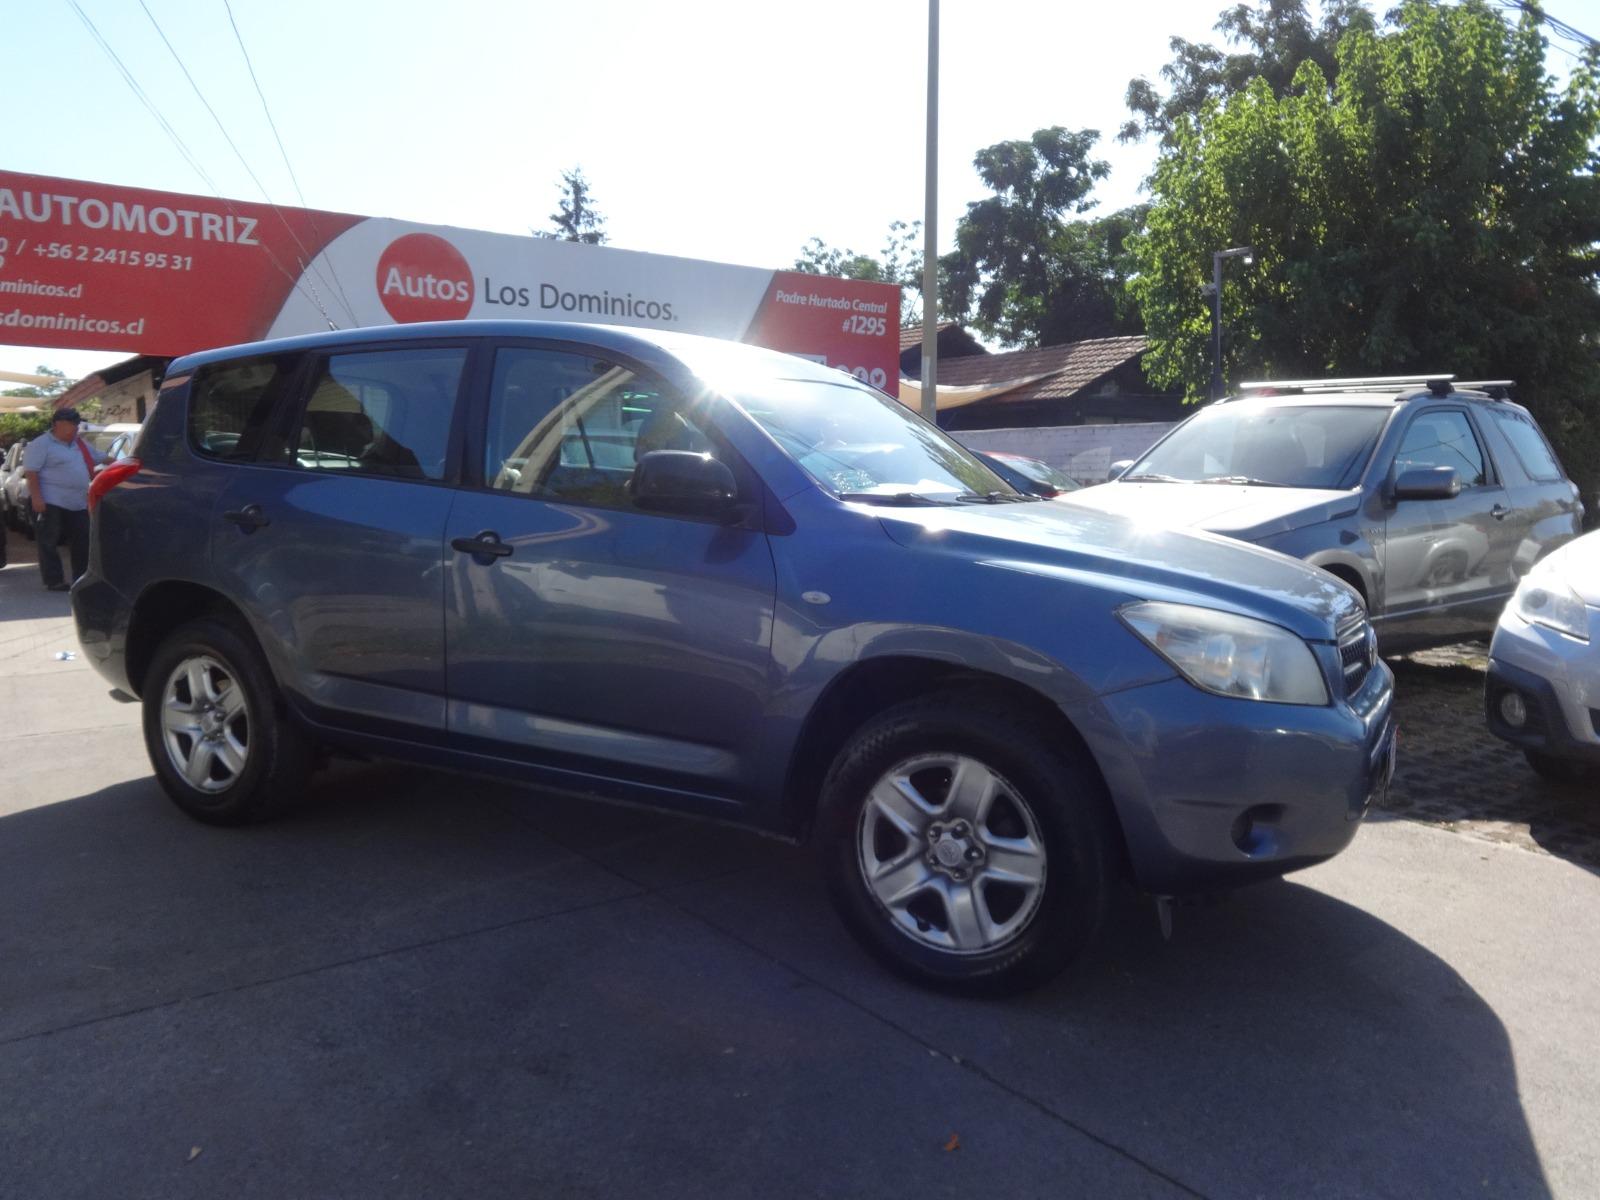 TOYOTA RAV 4 2.4 Automatica  2006 FULL AIRE AIRBAG ABS - AUTOS LOS DOMINICOS